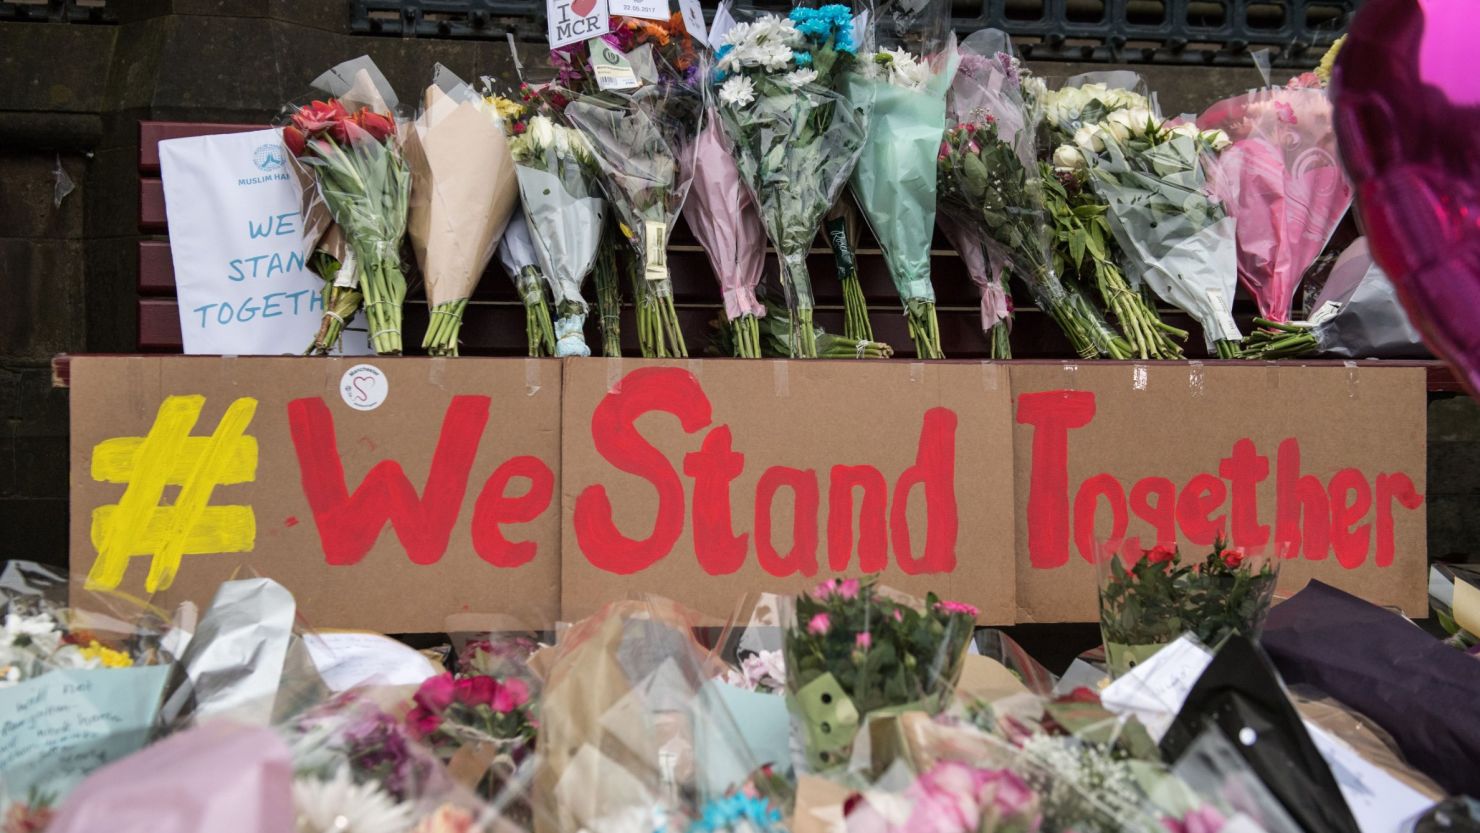 Tributes to the victims of the Manchester Arena bombing are seen in Manchester on May 24, 2017.